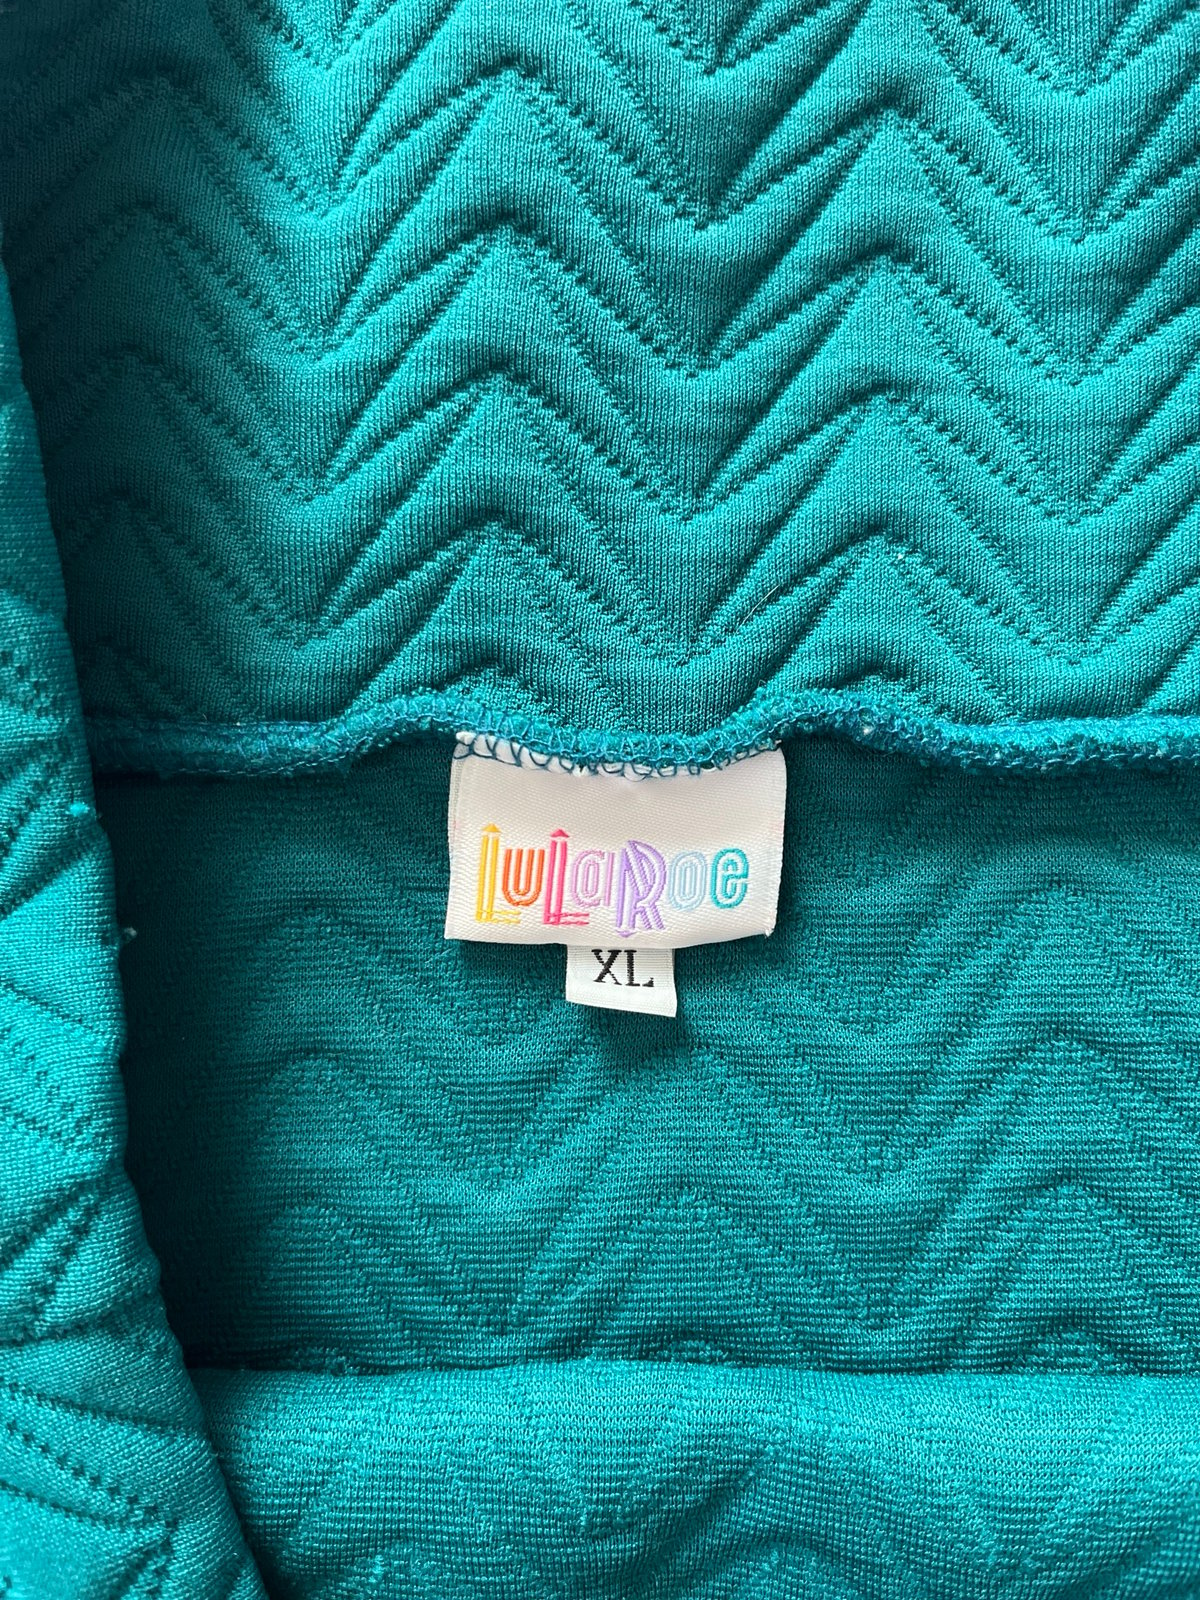 cheapest place to buy  Lularoe Cassie Skirt - Teal Quilted Fabric - Size XL pISSkLfFj online store